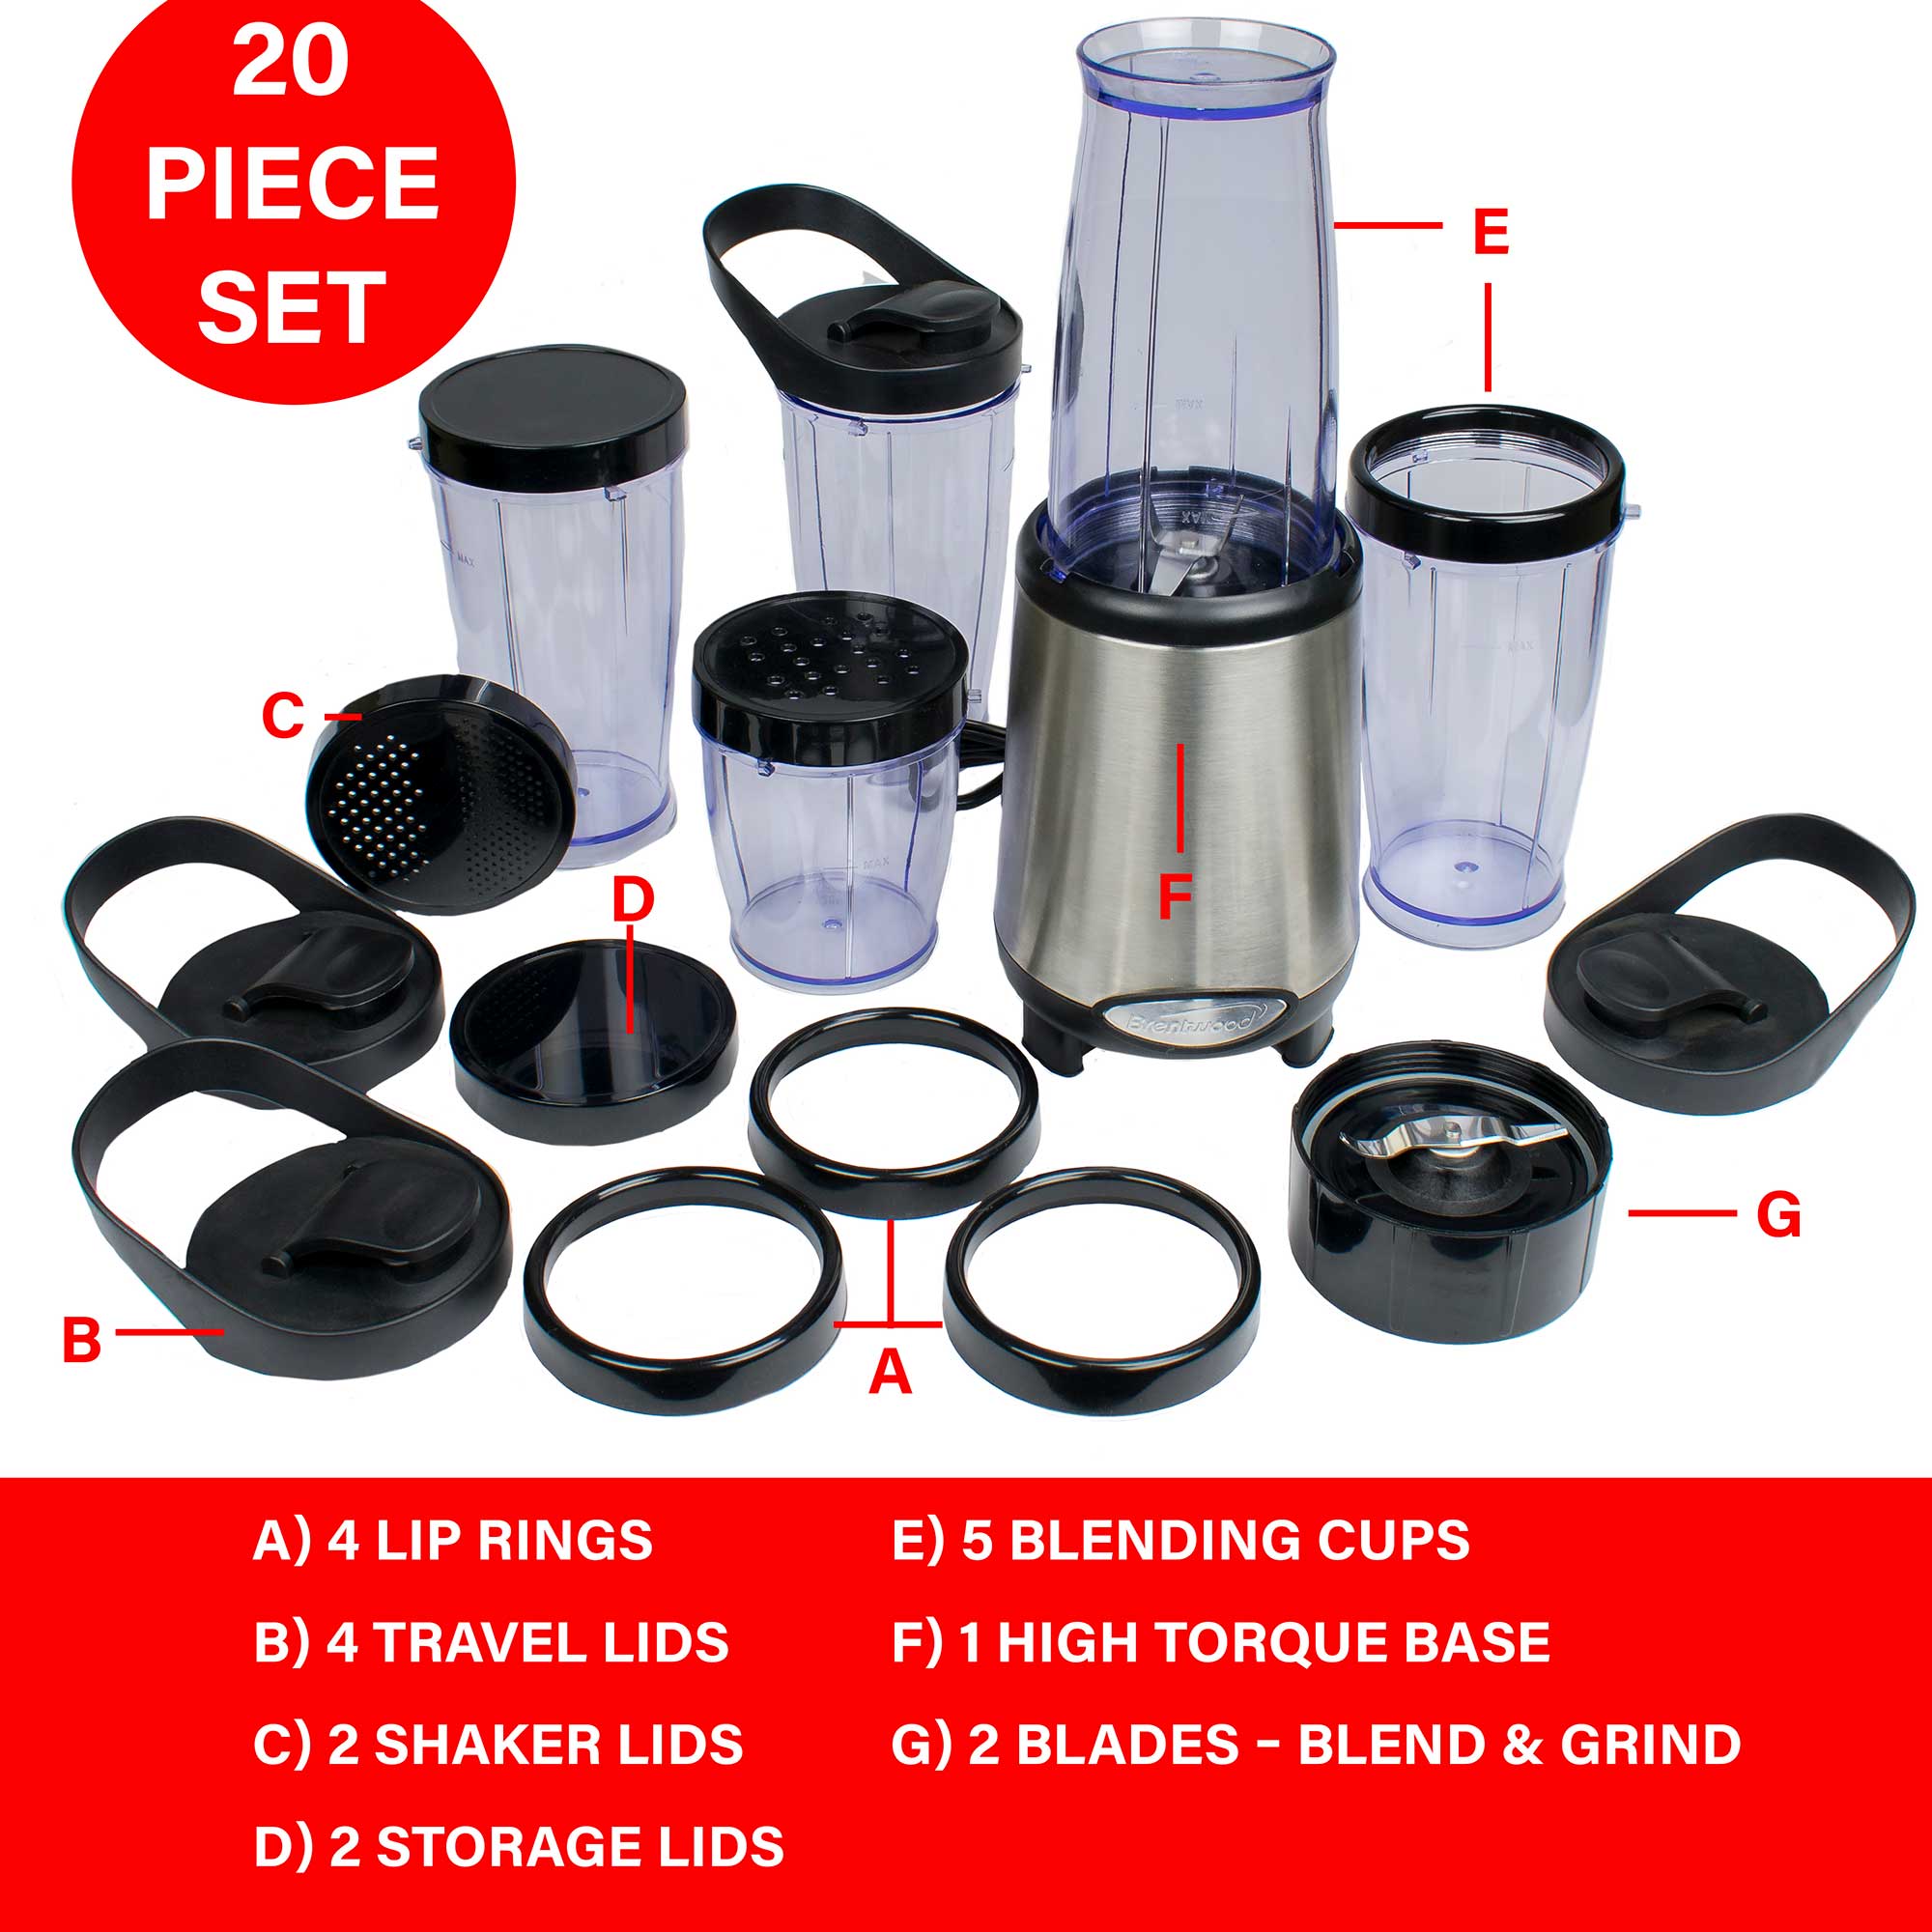 Magic Bullet Replacement Parts 5 Cups, Shaker-Steamer Tops, Lids